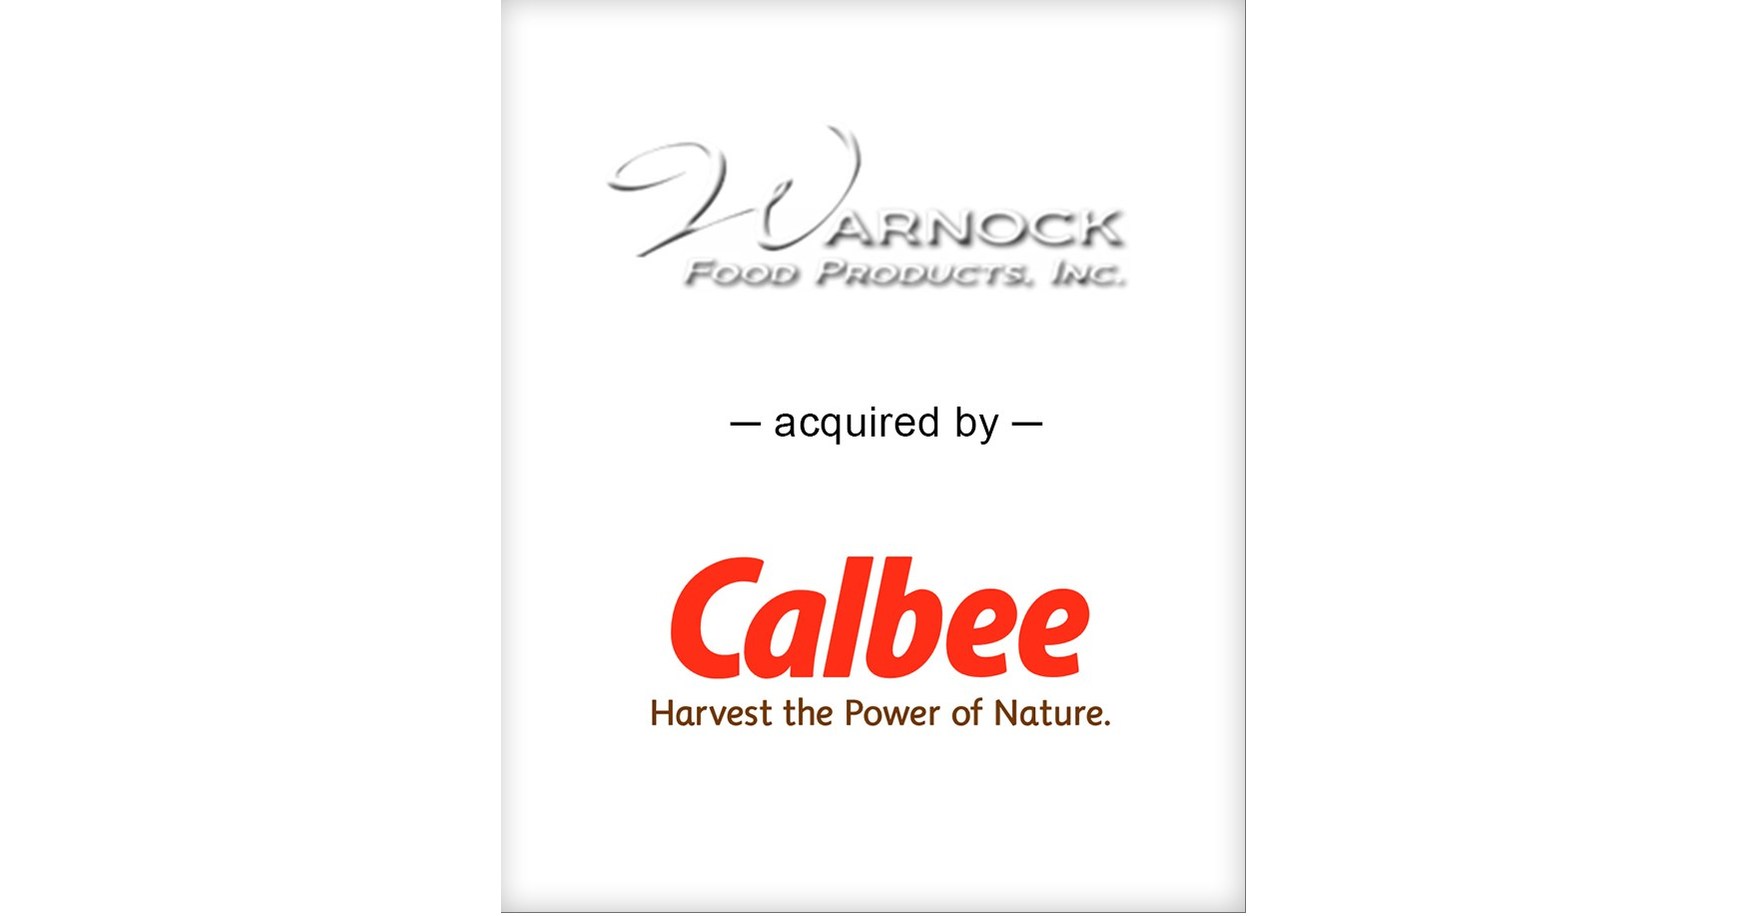 Bgl Announces The Sale Of Warnock Food Products To Calbee